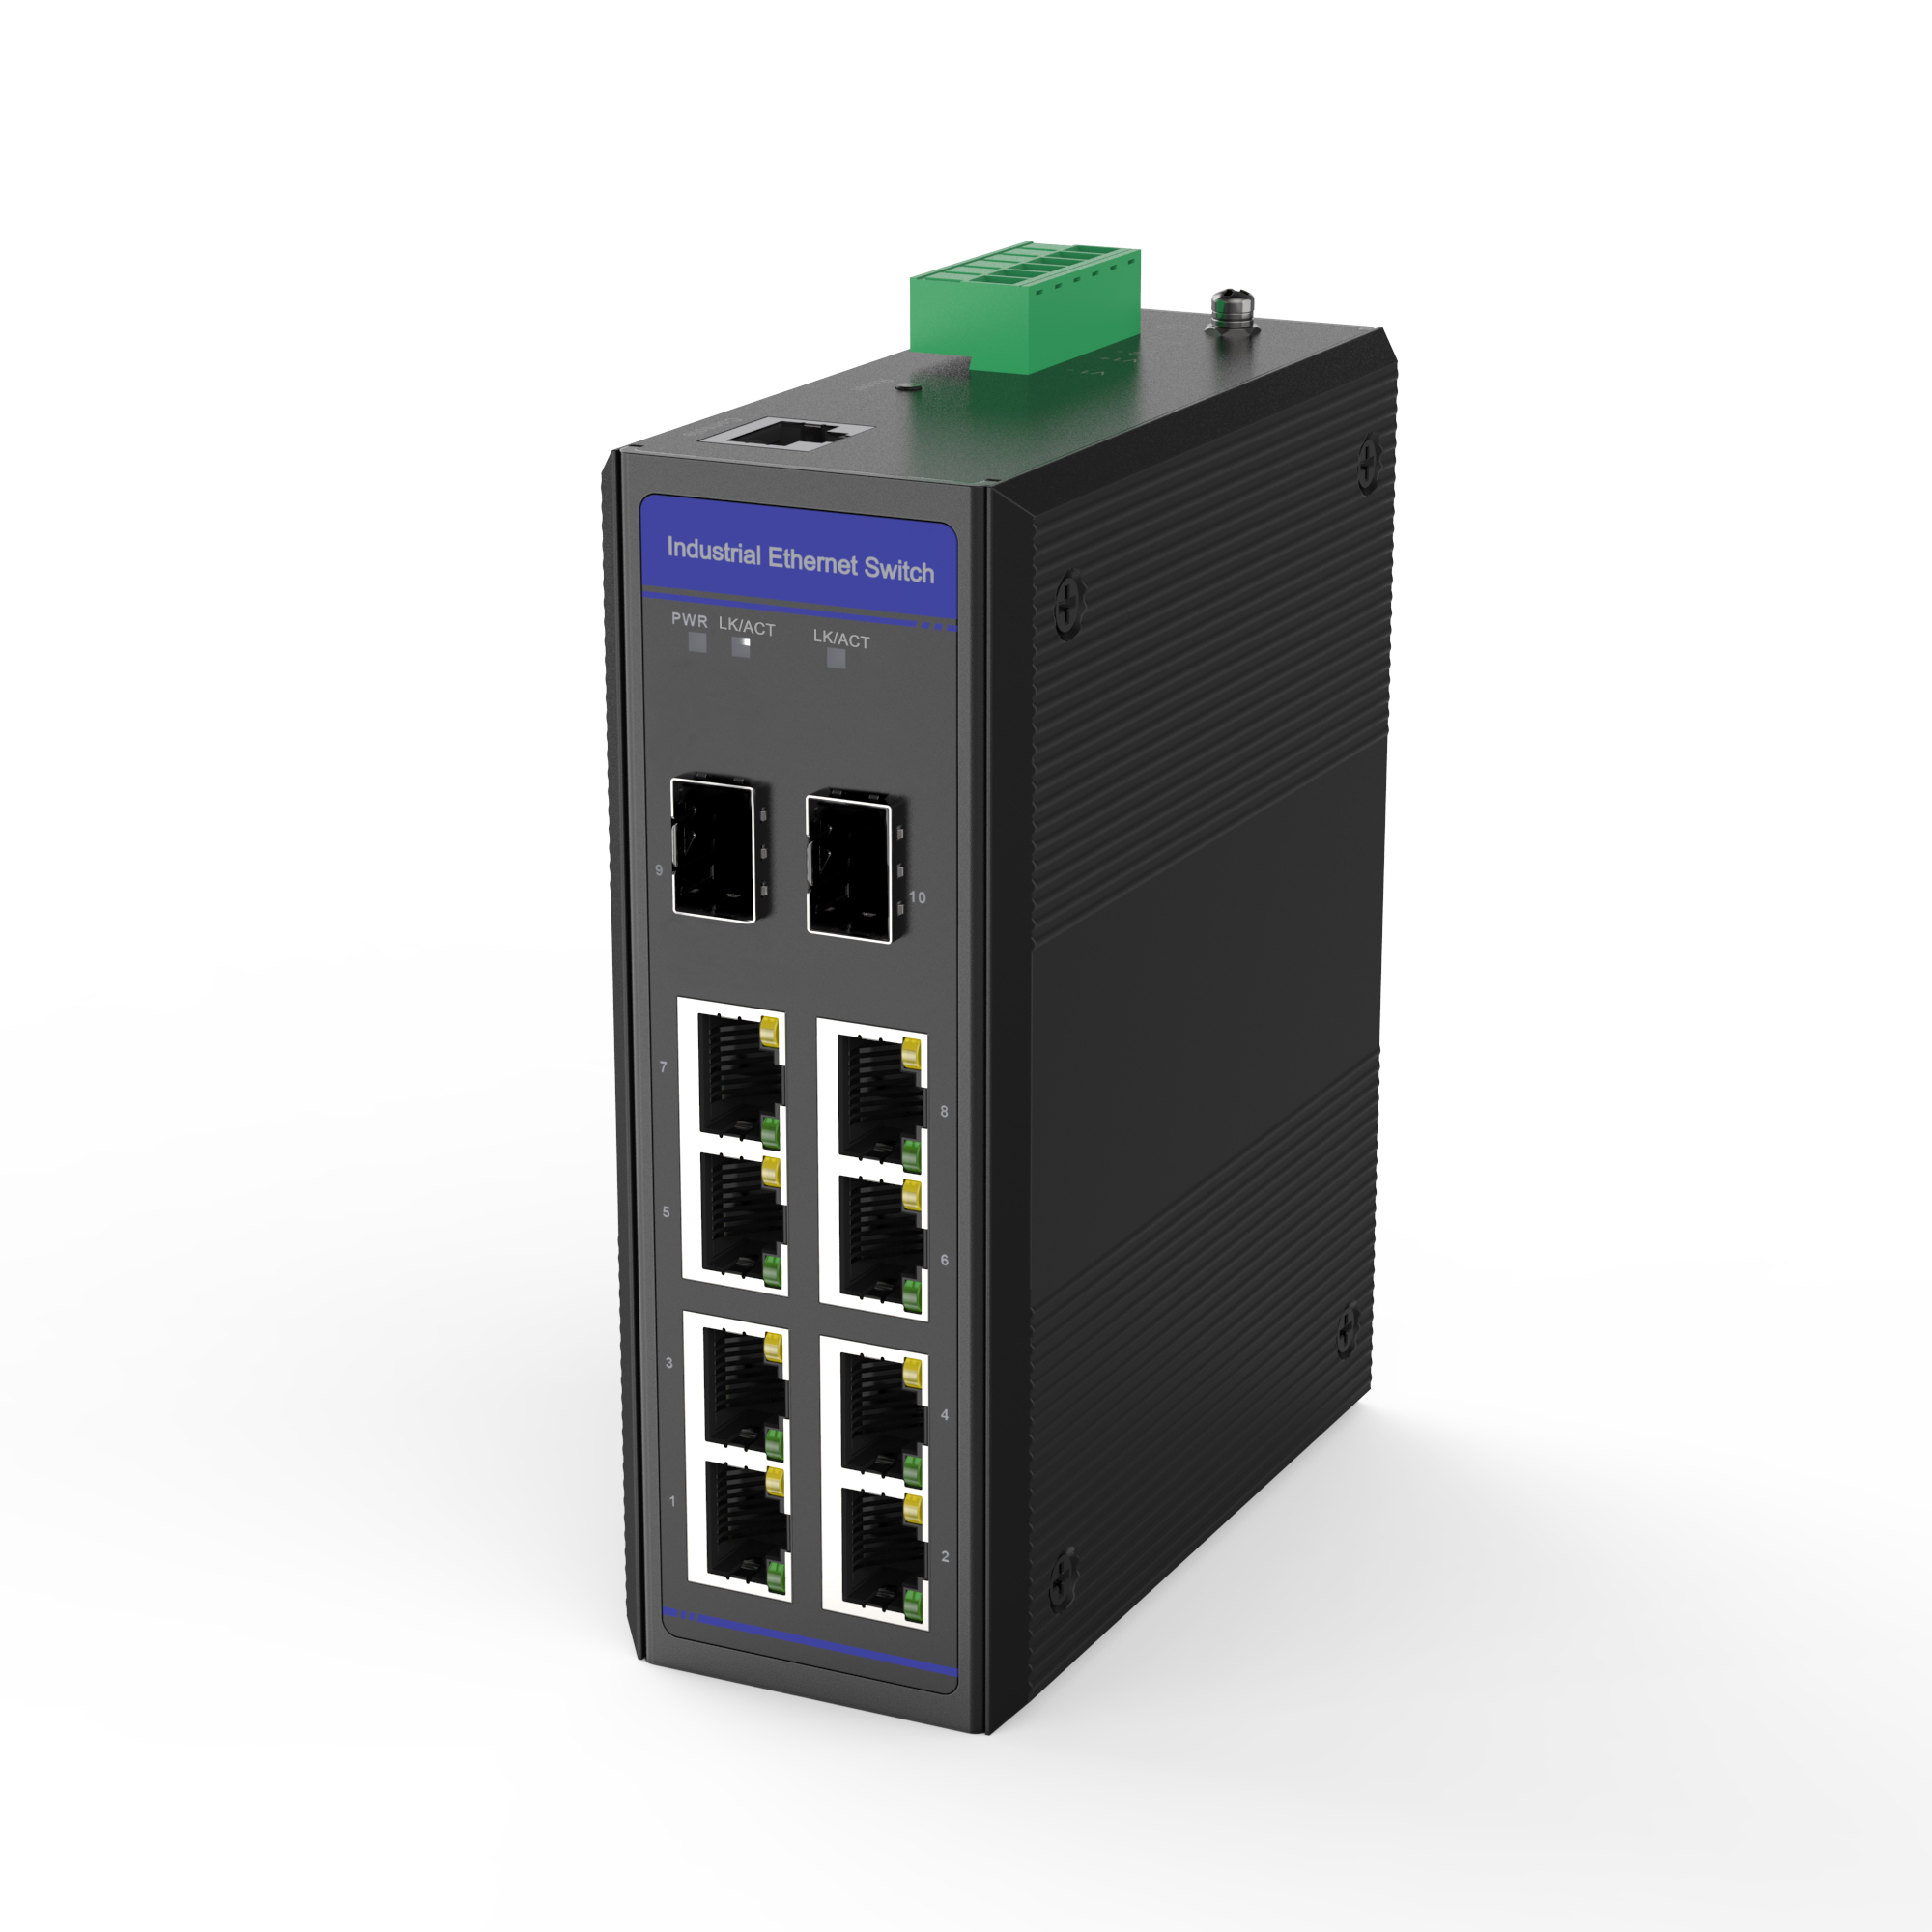 TH-G310-8E2SFP Industrial Ethernet Switch